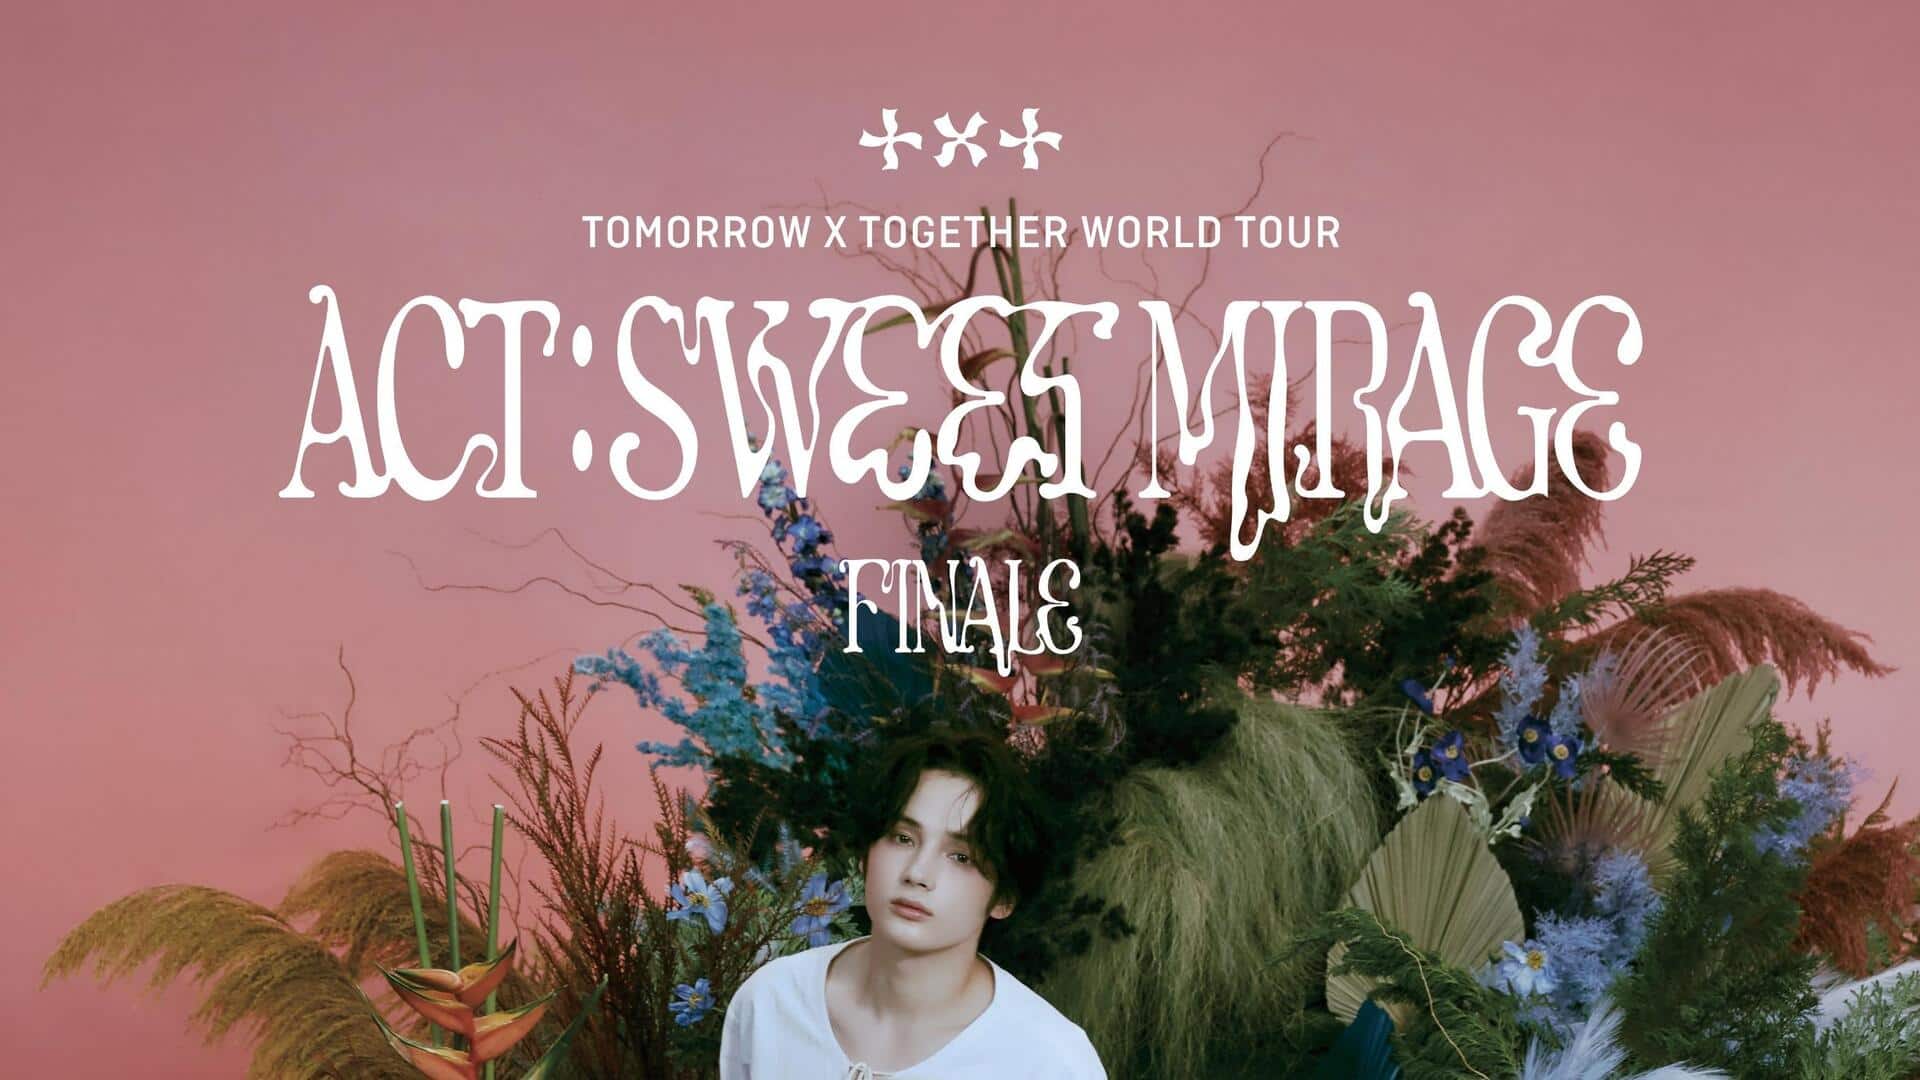 TXT's 'Act: Sweet Mirageworld' tour finale details are out